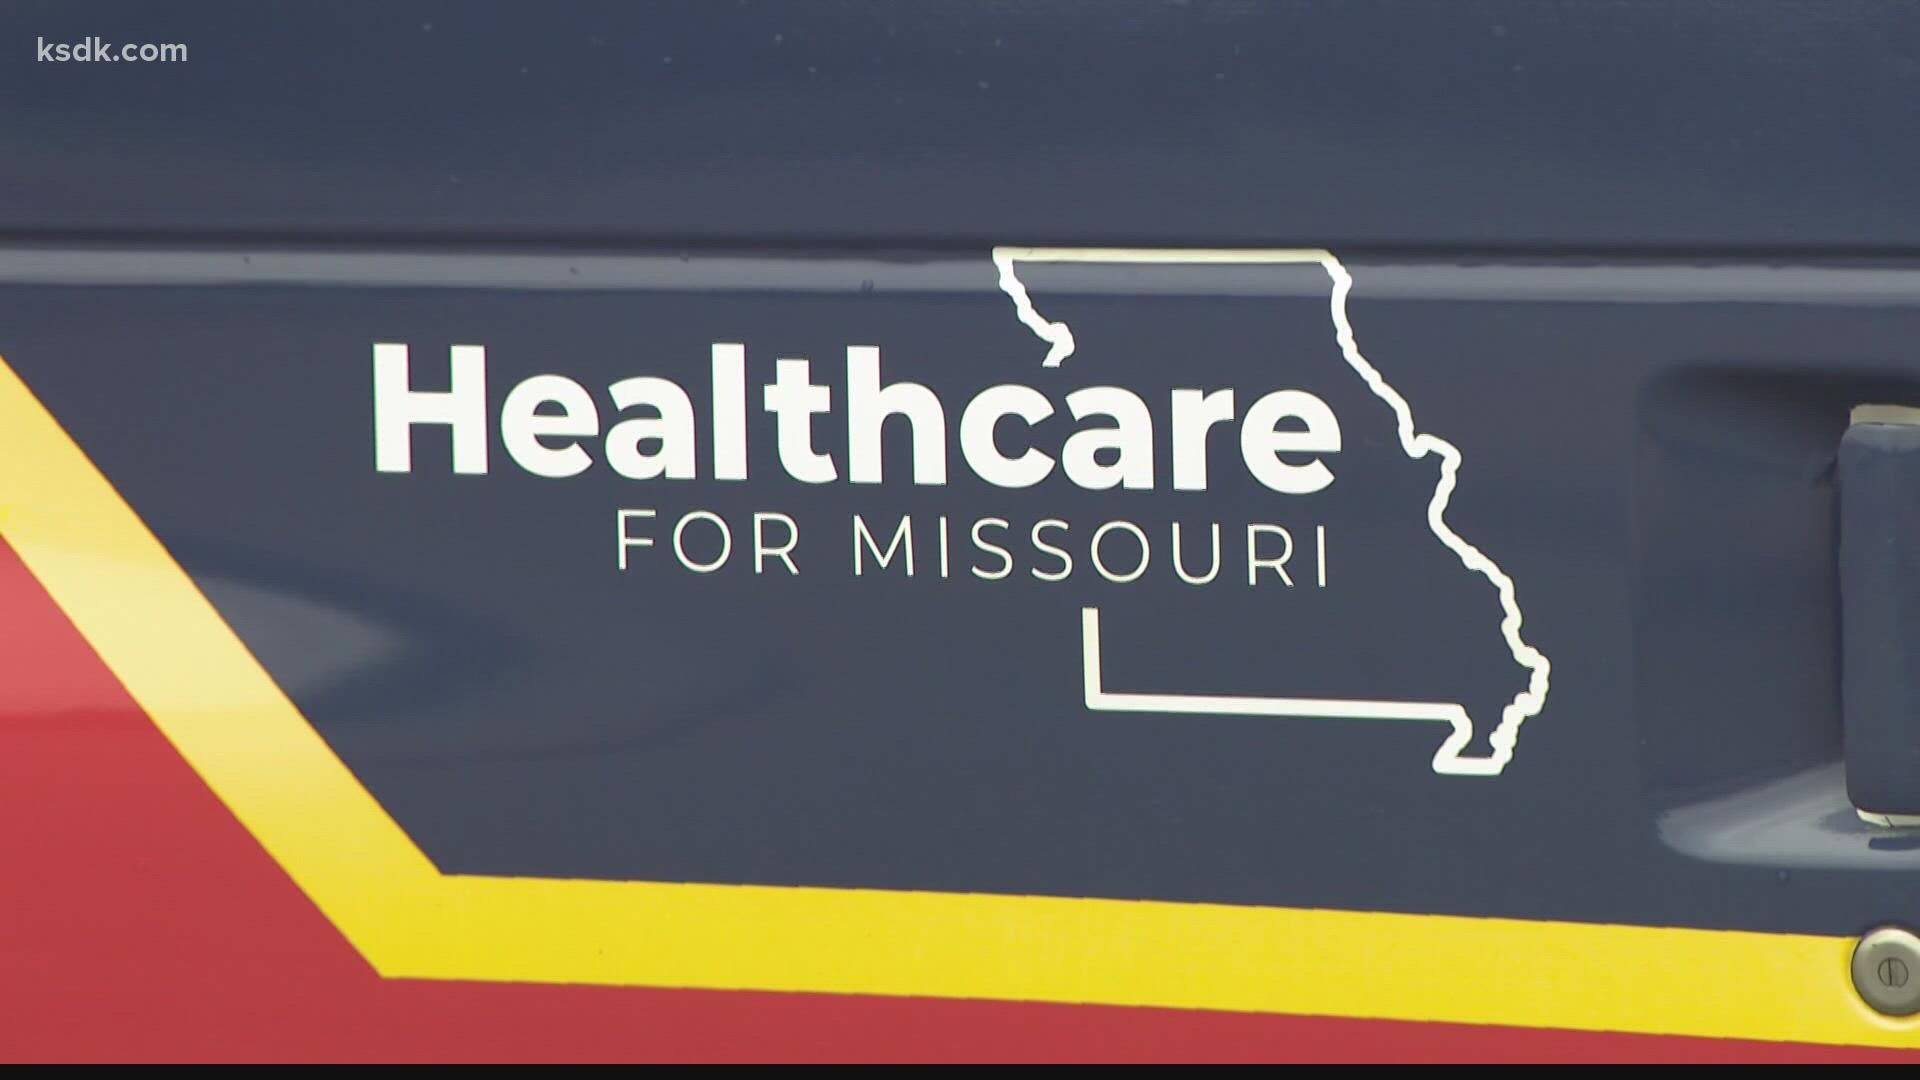 Medicaid expansion for about 275,000 eligible Missourians, finally took effect this week.